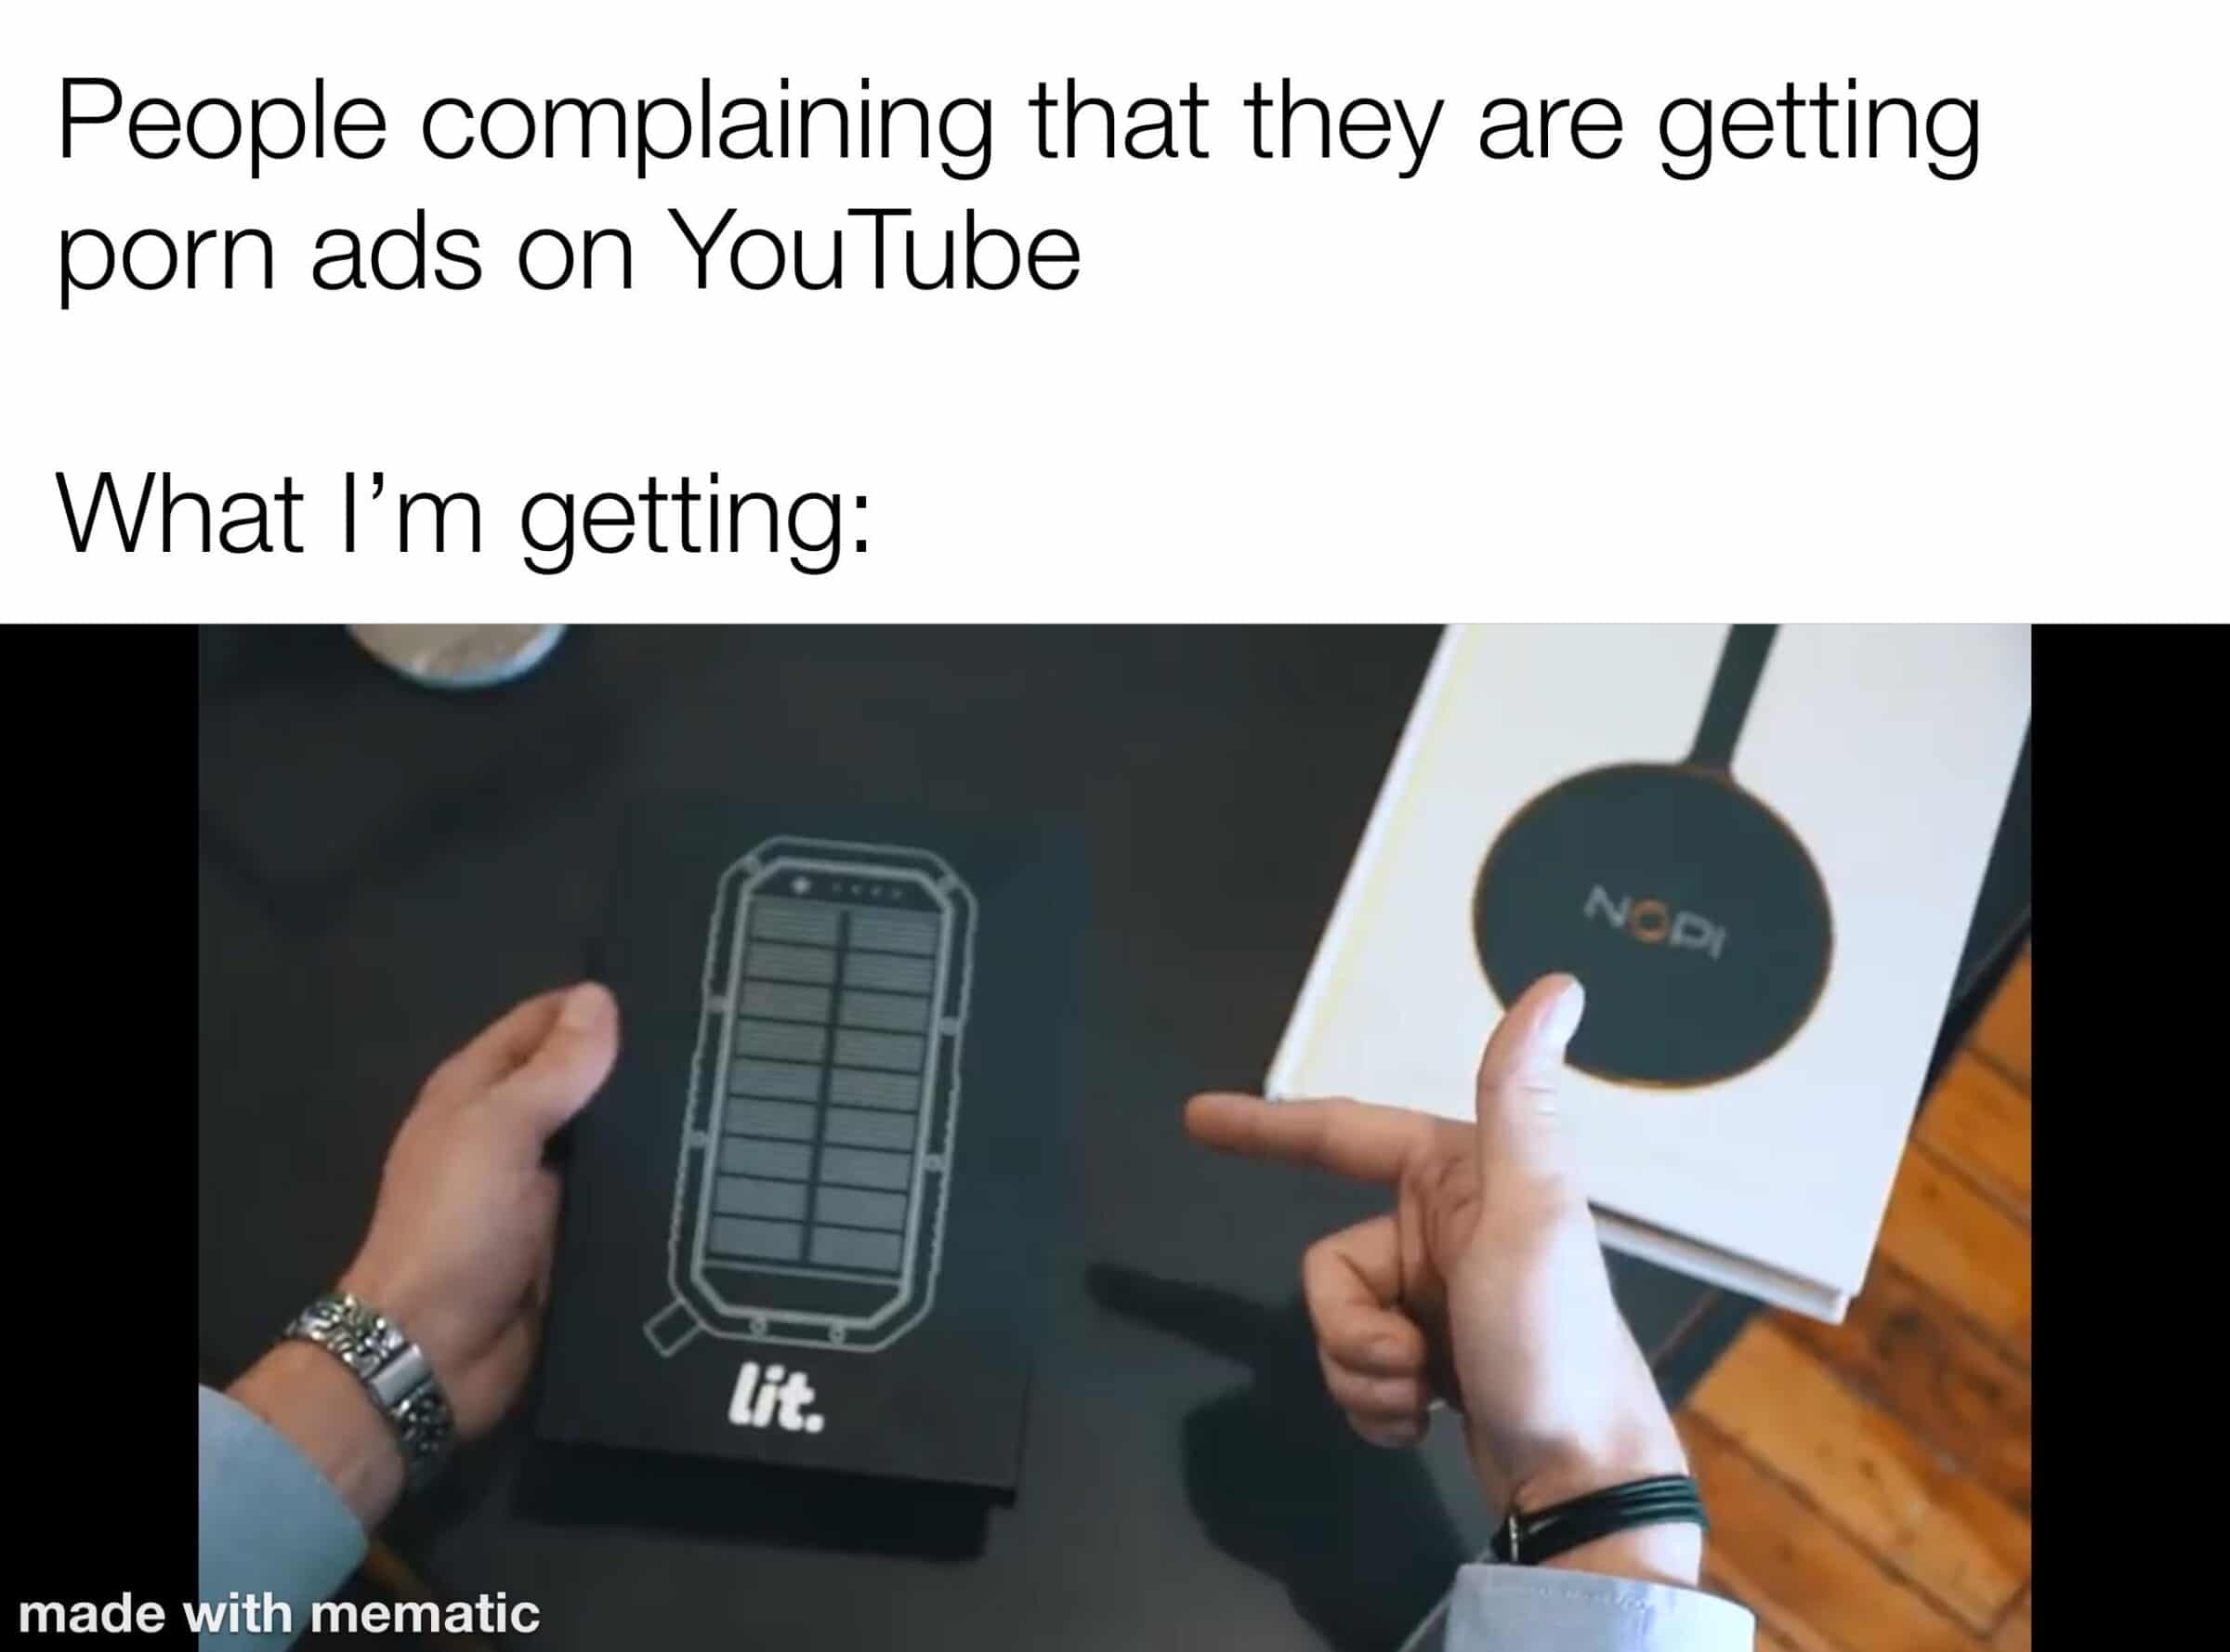 Funny, Grammarly, Epoch Times, TikTok, PlayStation, Lit Mobile other memes Funny, Grammarly, Epoch Times, TikTok, PlayStation, Lit Mobile text: People complaining that they are getting porn ads on YouTube What I'm getting: lit. made with mematic 